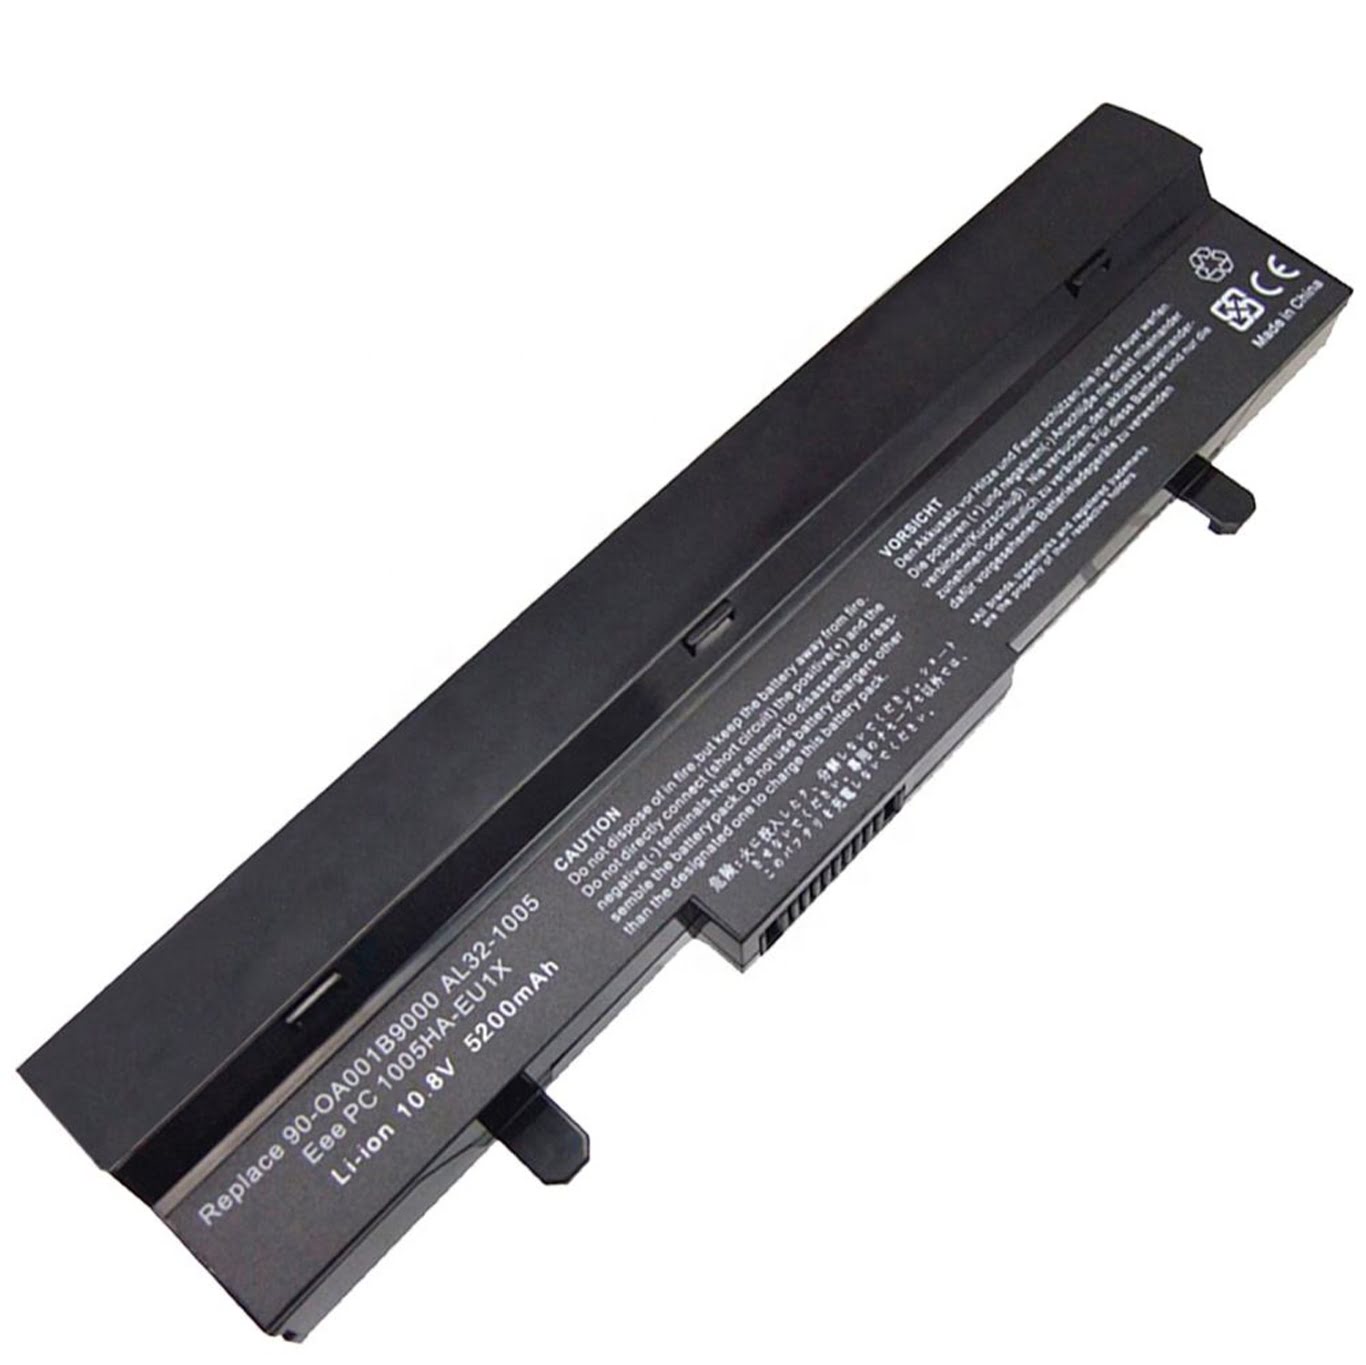 Asus 990-oa001b9000, 90-oa001b9100 Laptop Battery For 1001ha, 1001hgo replacement